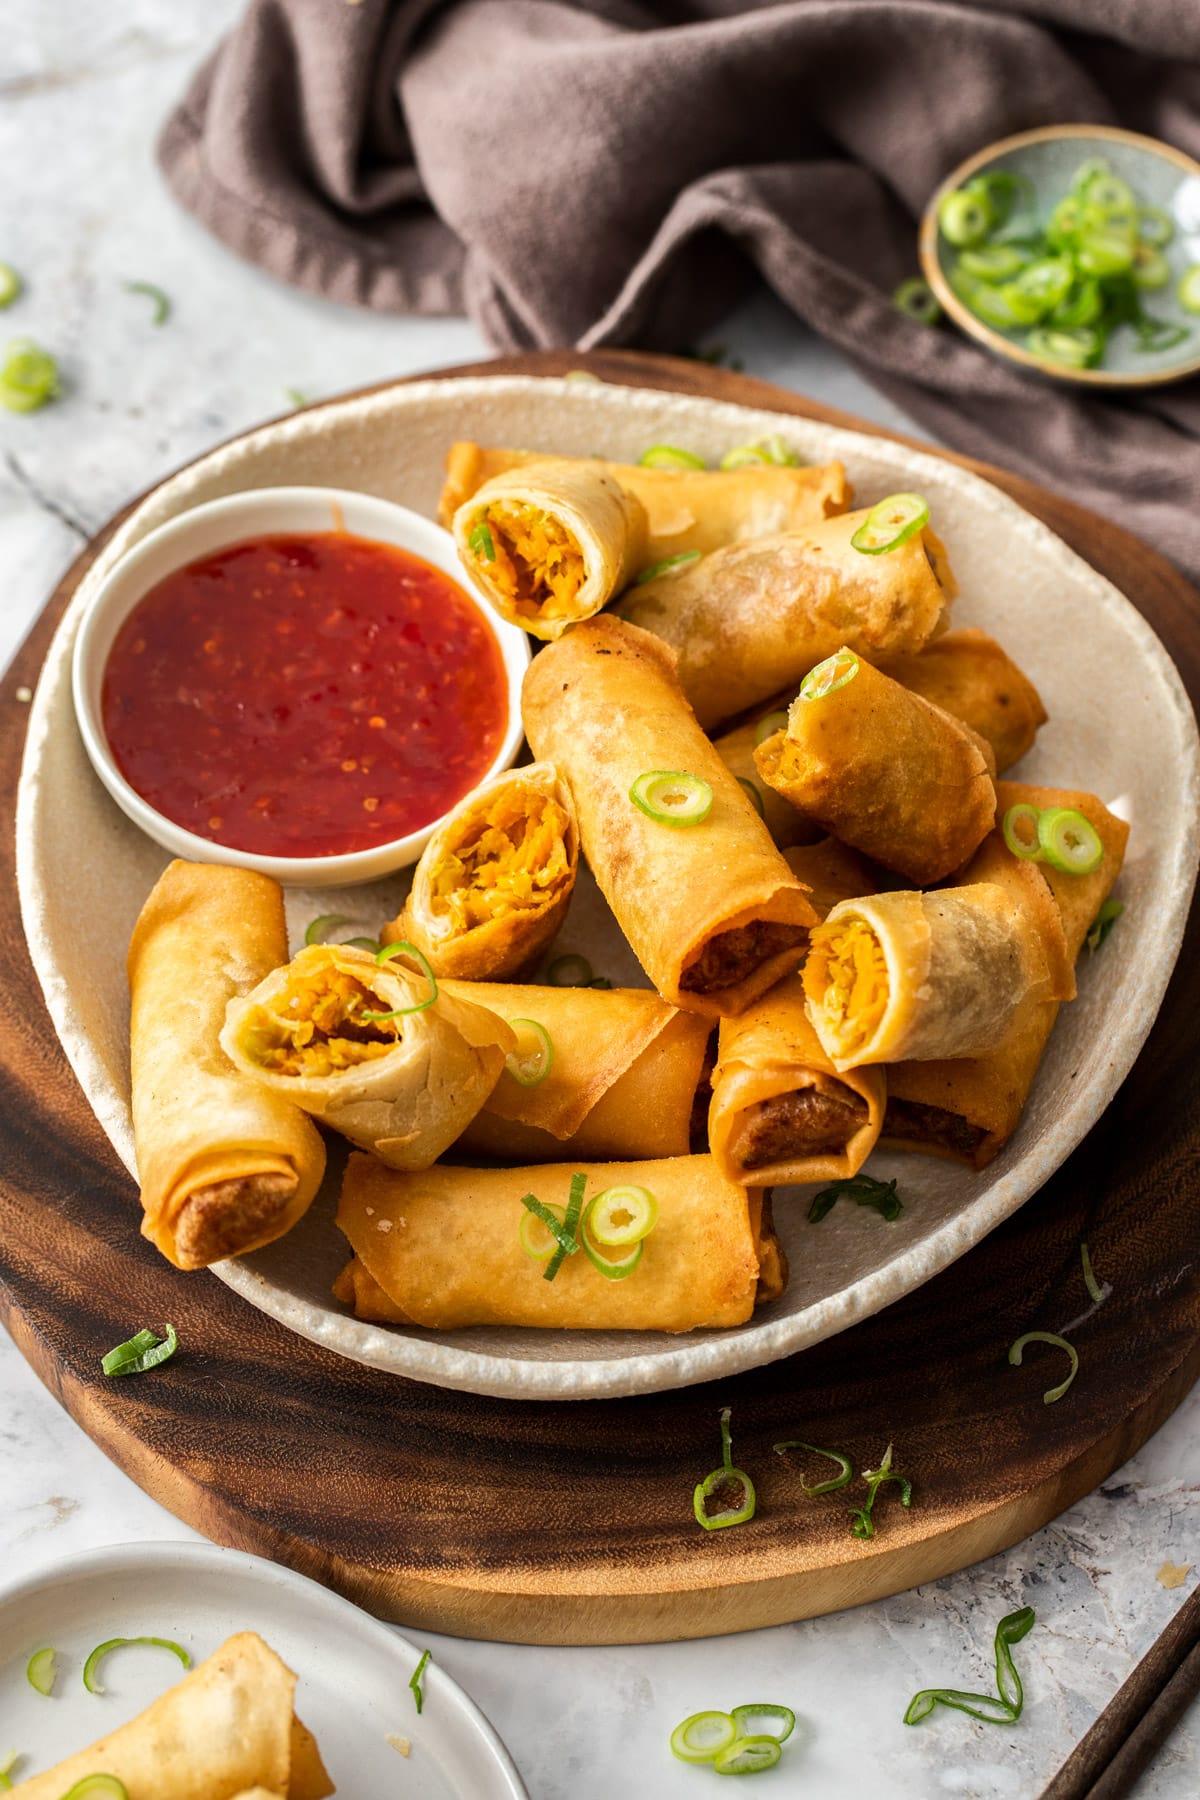 https://www.thecookingcollective.com.au/wp-content/uploads/2022/08/Vegetable-Spring-Rolls-2.jpg